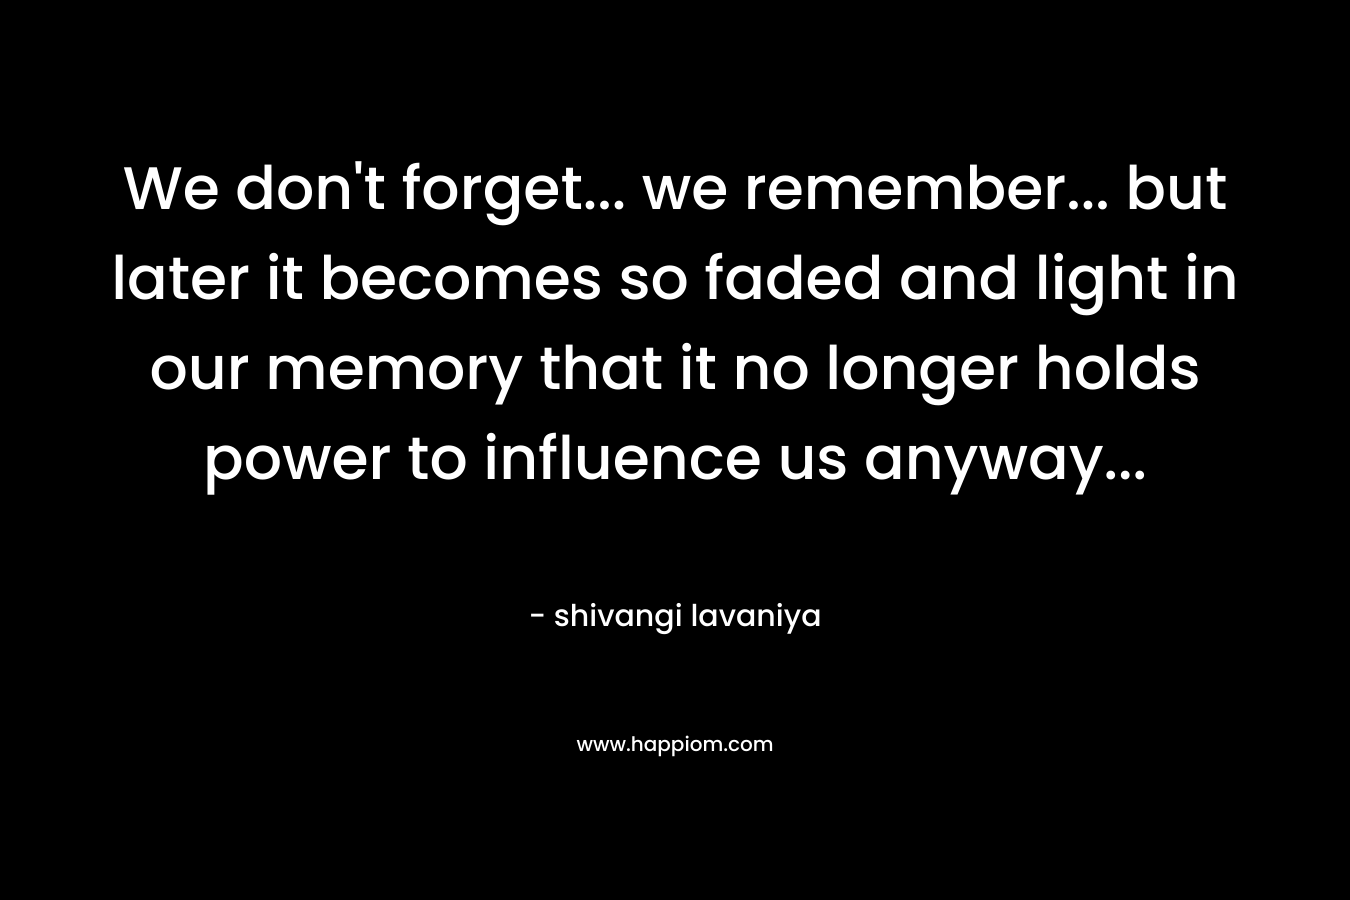 We don't forget... we remember... but later it becomes so faded and light in our memory that it no longer holds power to influence us anyway...